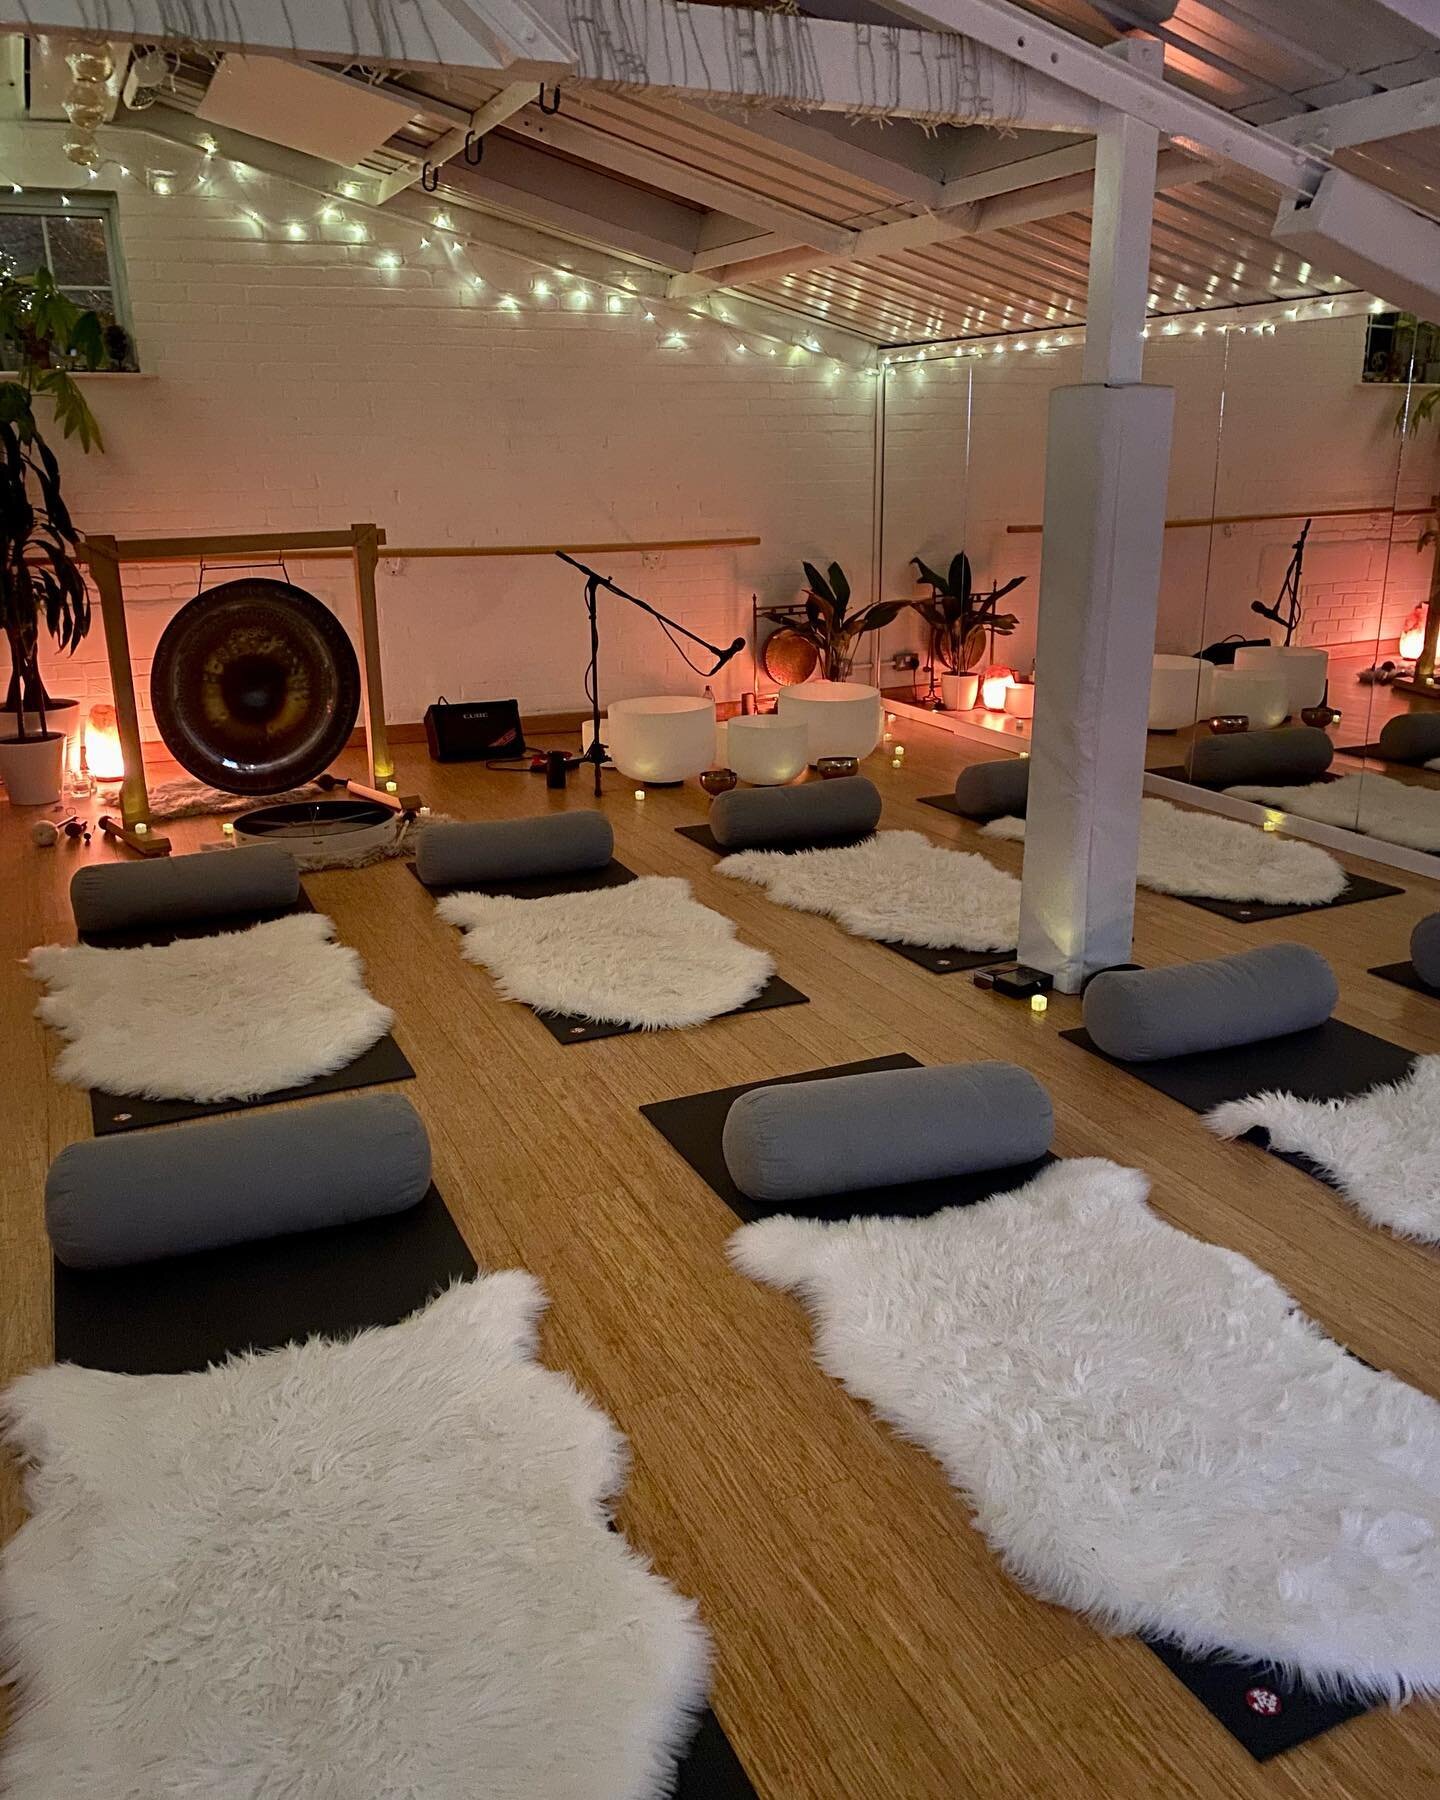 🤍 90 minutes of sound bathing bliss at @matspace_studios last night. Thank you to all who came, I&rsquo;m so pleased the longer session felt so good for everyone. 🙏 

New dates will be confirmed over the next few days. Have a beautiful weekend! 💫
